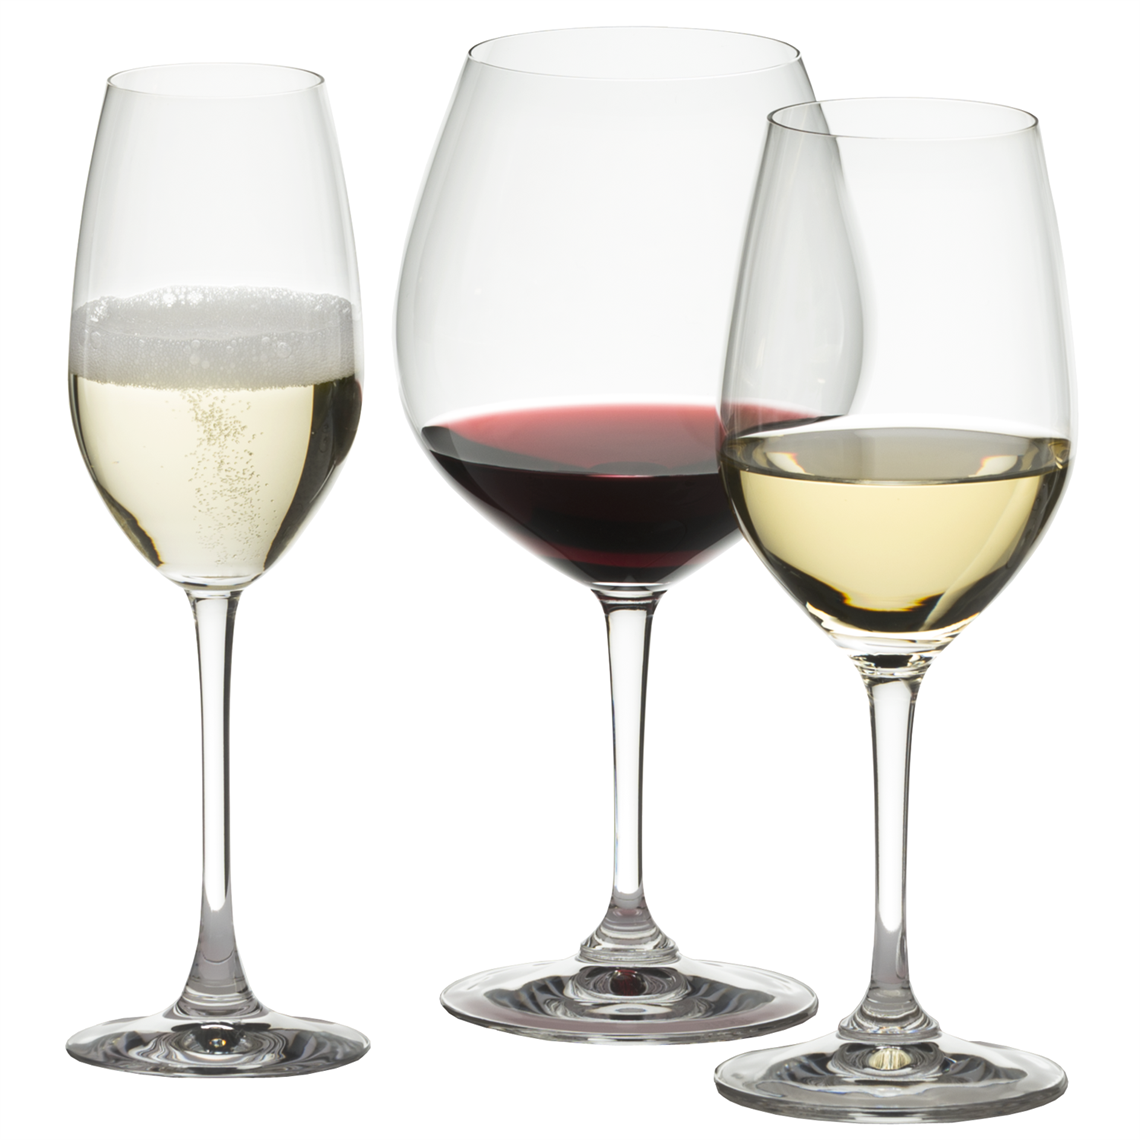 View more new york bar from our Restaurant & Trade Glasses range